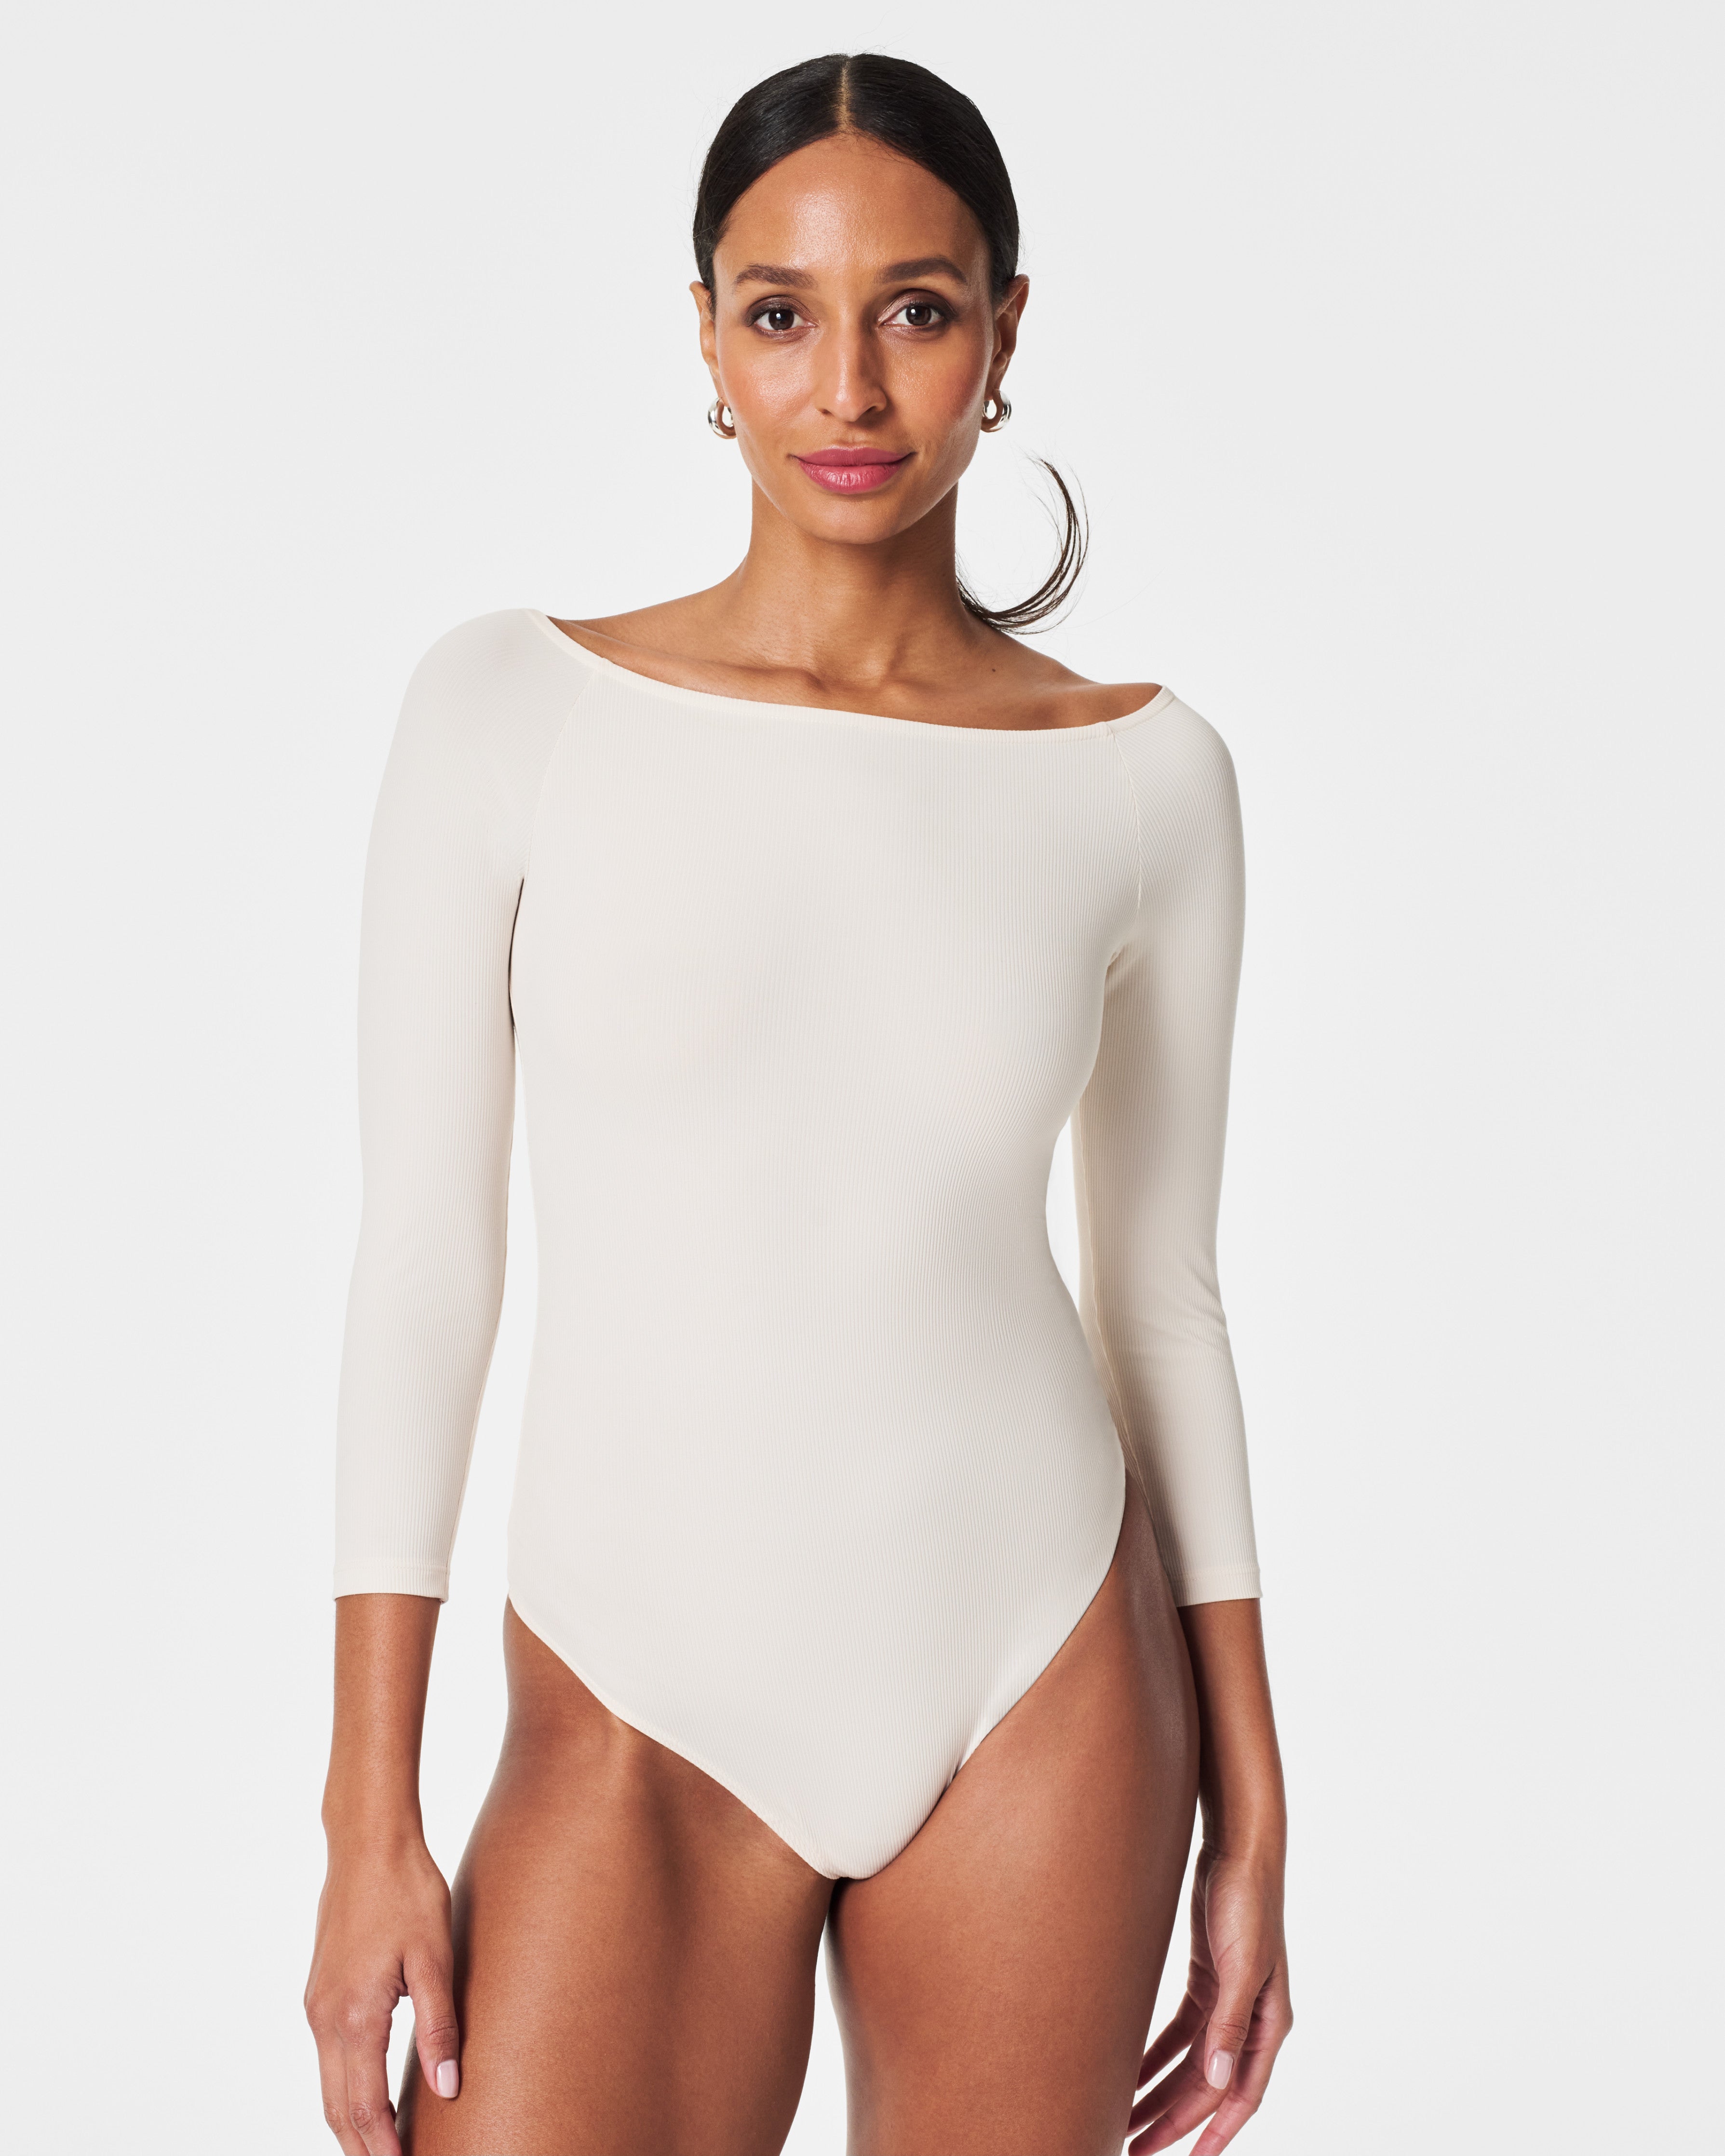 Spanx Suit Yourself Long Sleeve Turtleneck Bodysuit in White